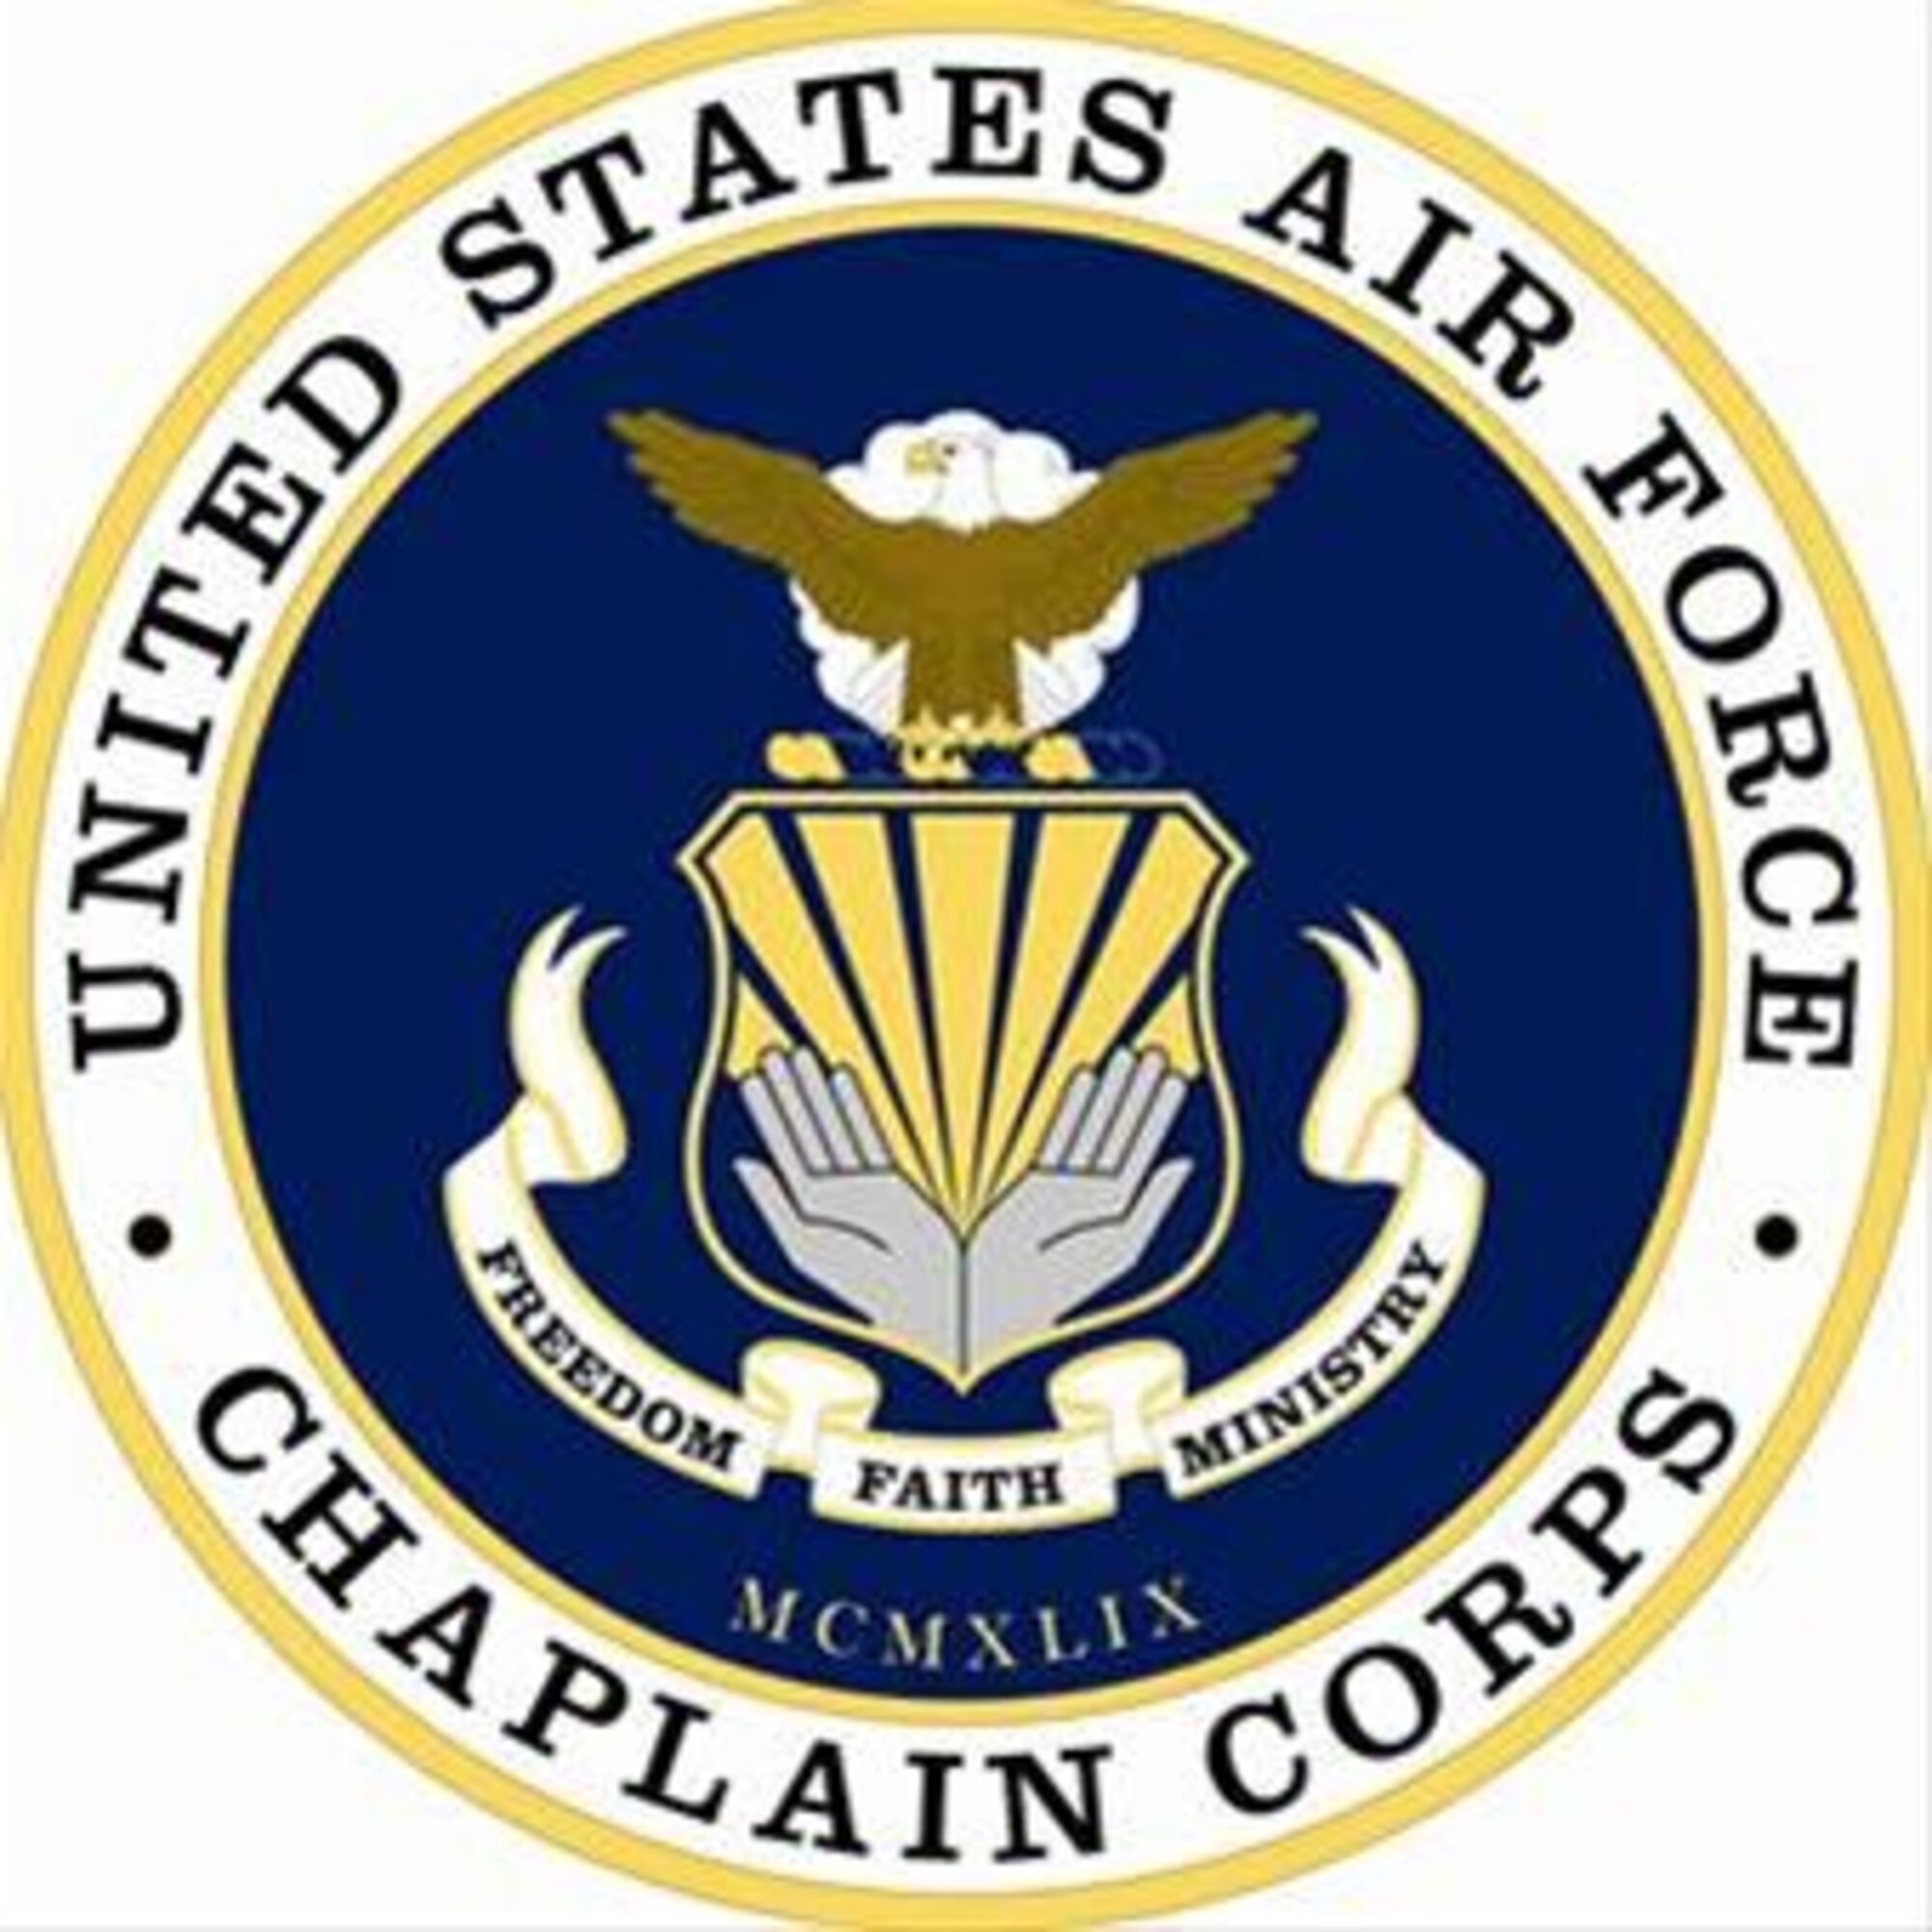 U.S. Air Force Chaplaincy (official Air Force graphic)